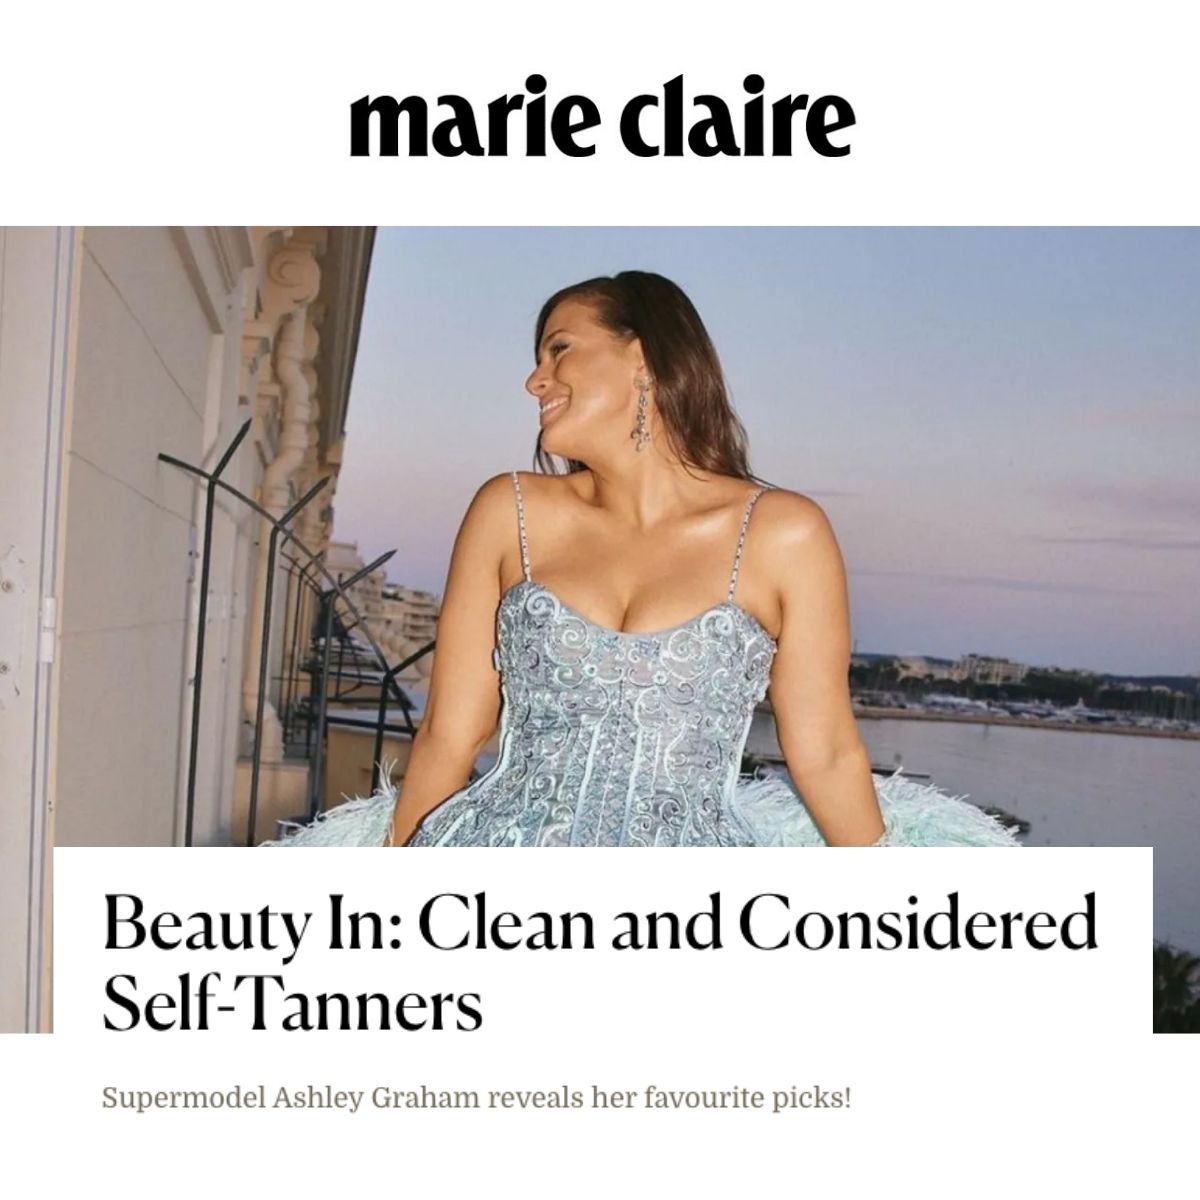 Beauty In: Clean and Considered Self-Tanners